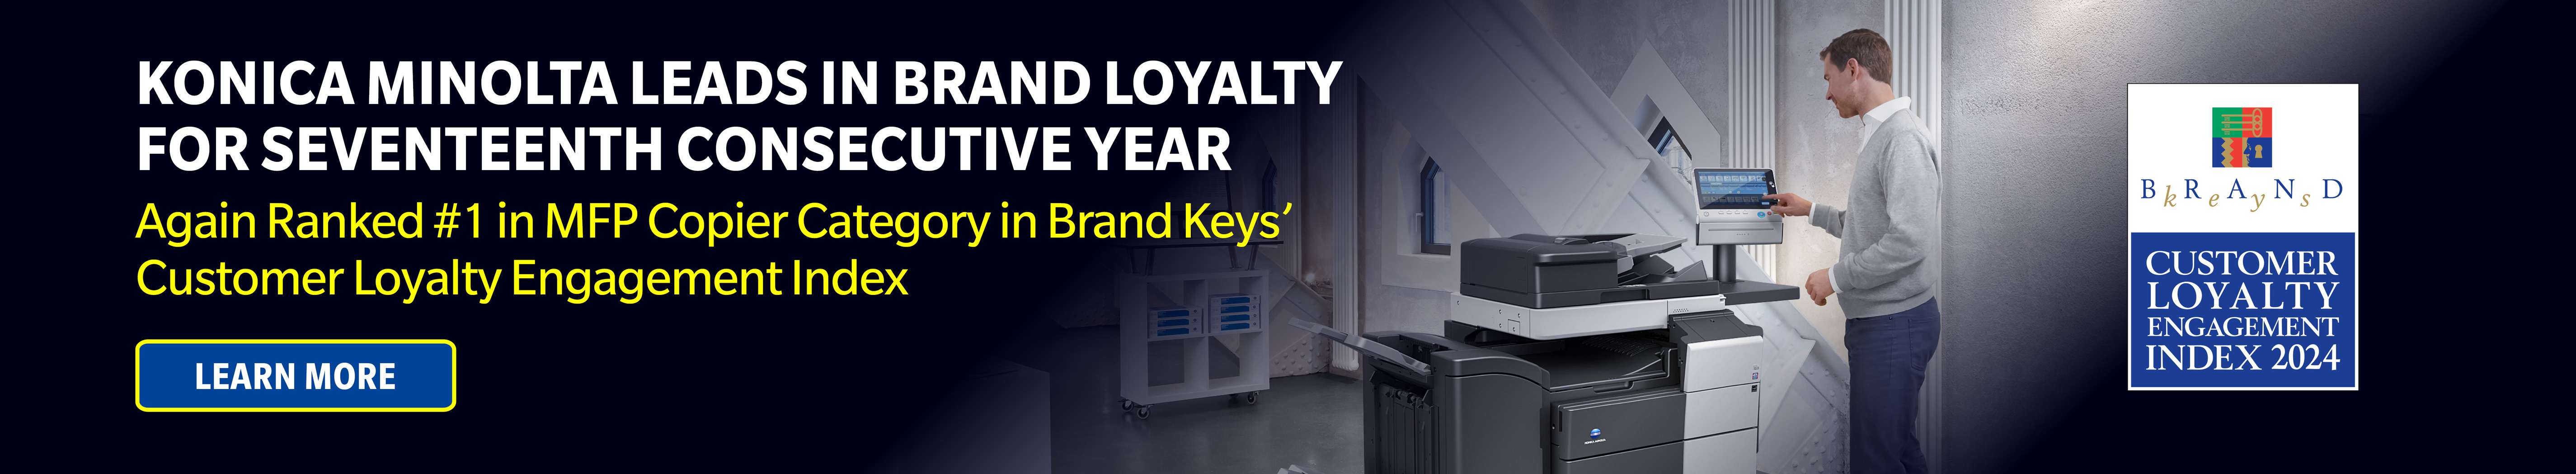 Konica Minolta Leads in Brand Loyalty for Seventeenth Consecutive Year